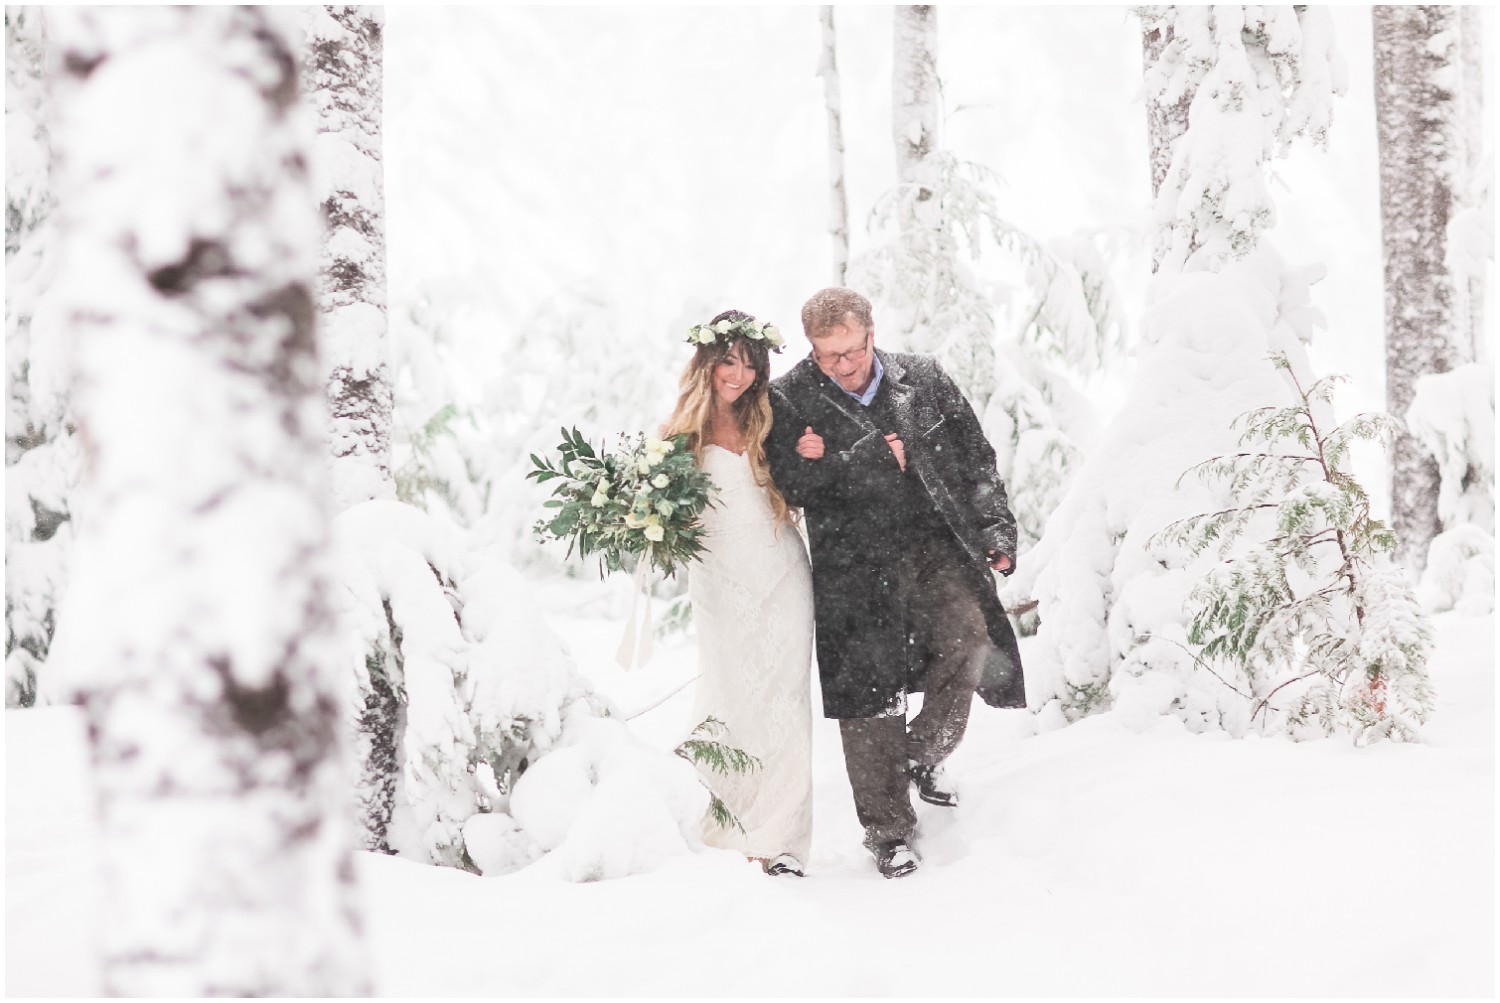 A Snowy Winter Elopement at Trillium Lake